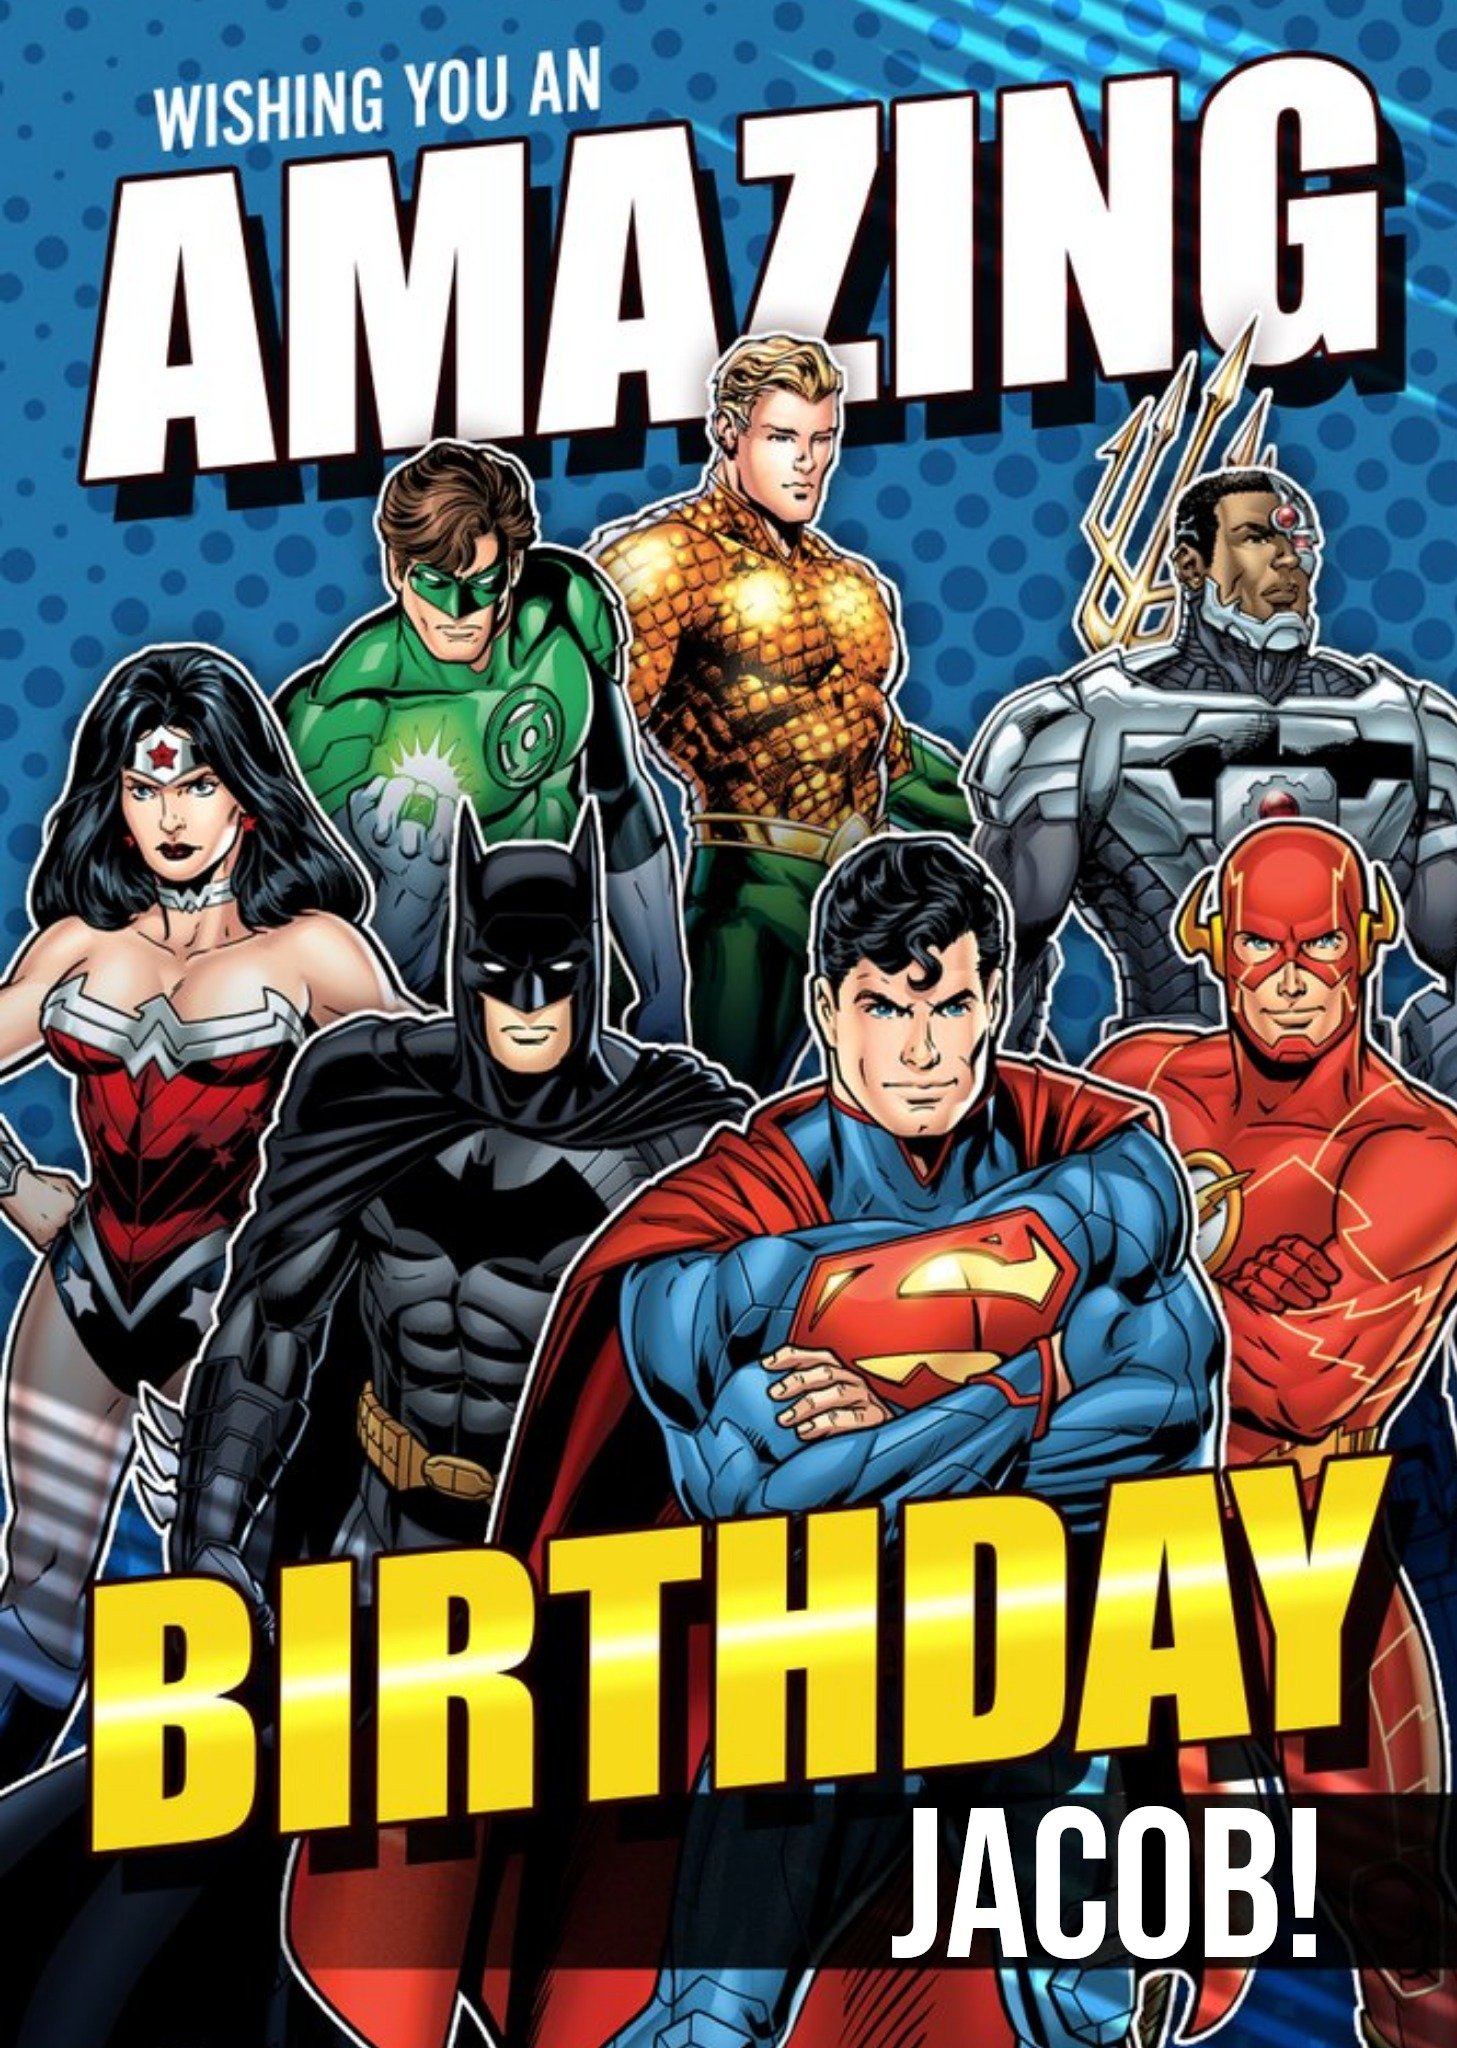 The Avengers Justice League Amazing Birthday Card, Large